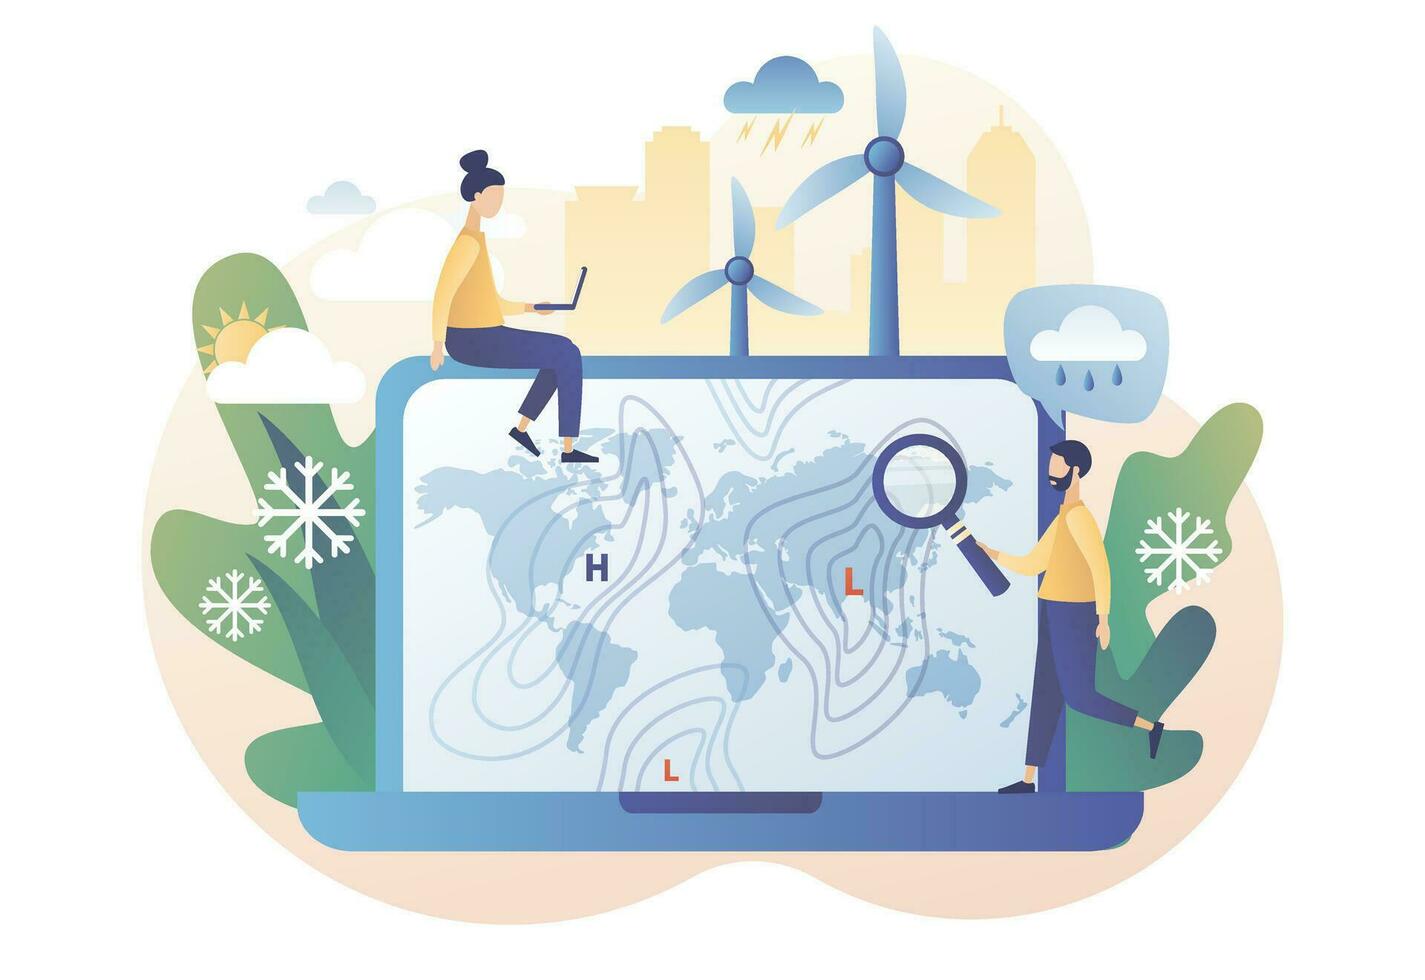 World Meteorological day. Meteorology science. Tiny people meteorologist studying and researching weather and climate condition online on laptop. Modern flat cartoon style. Vector illustration